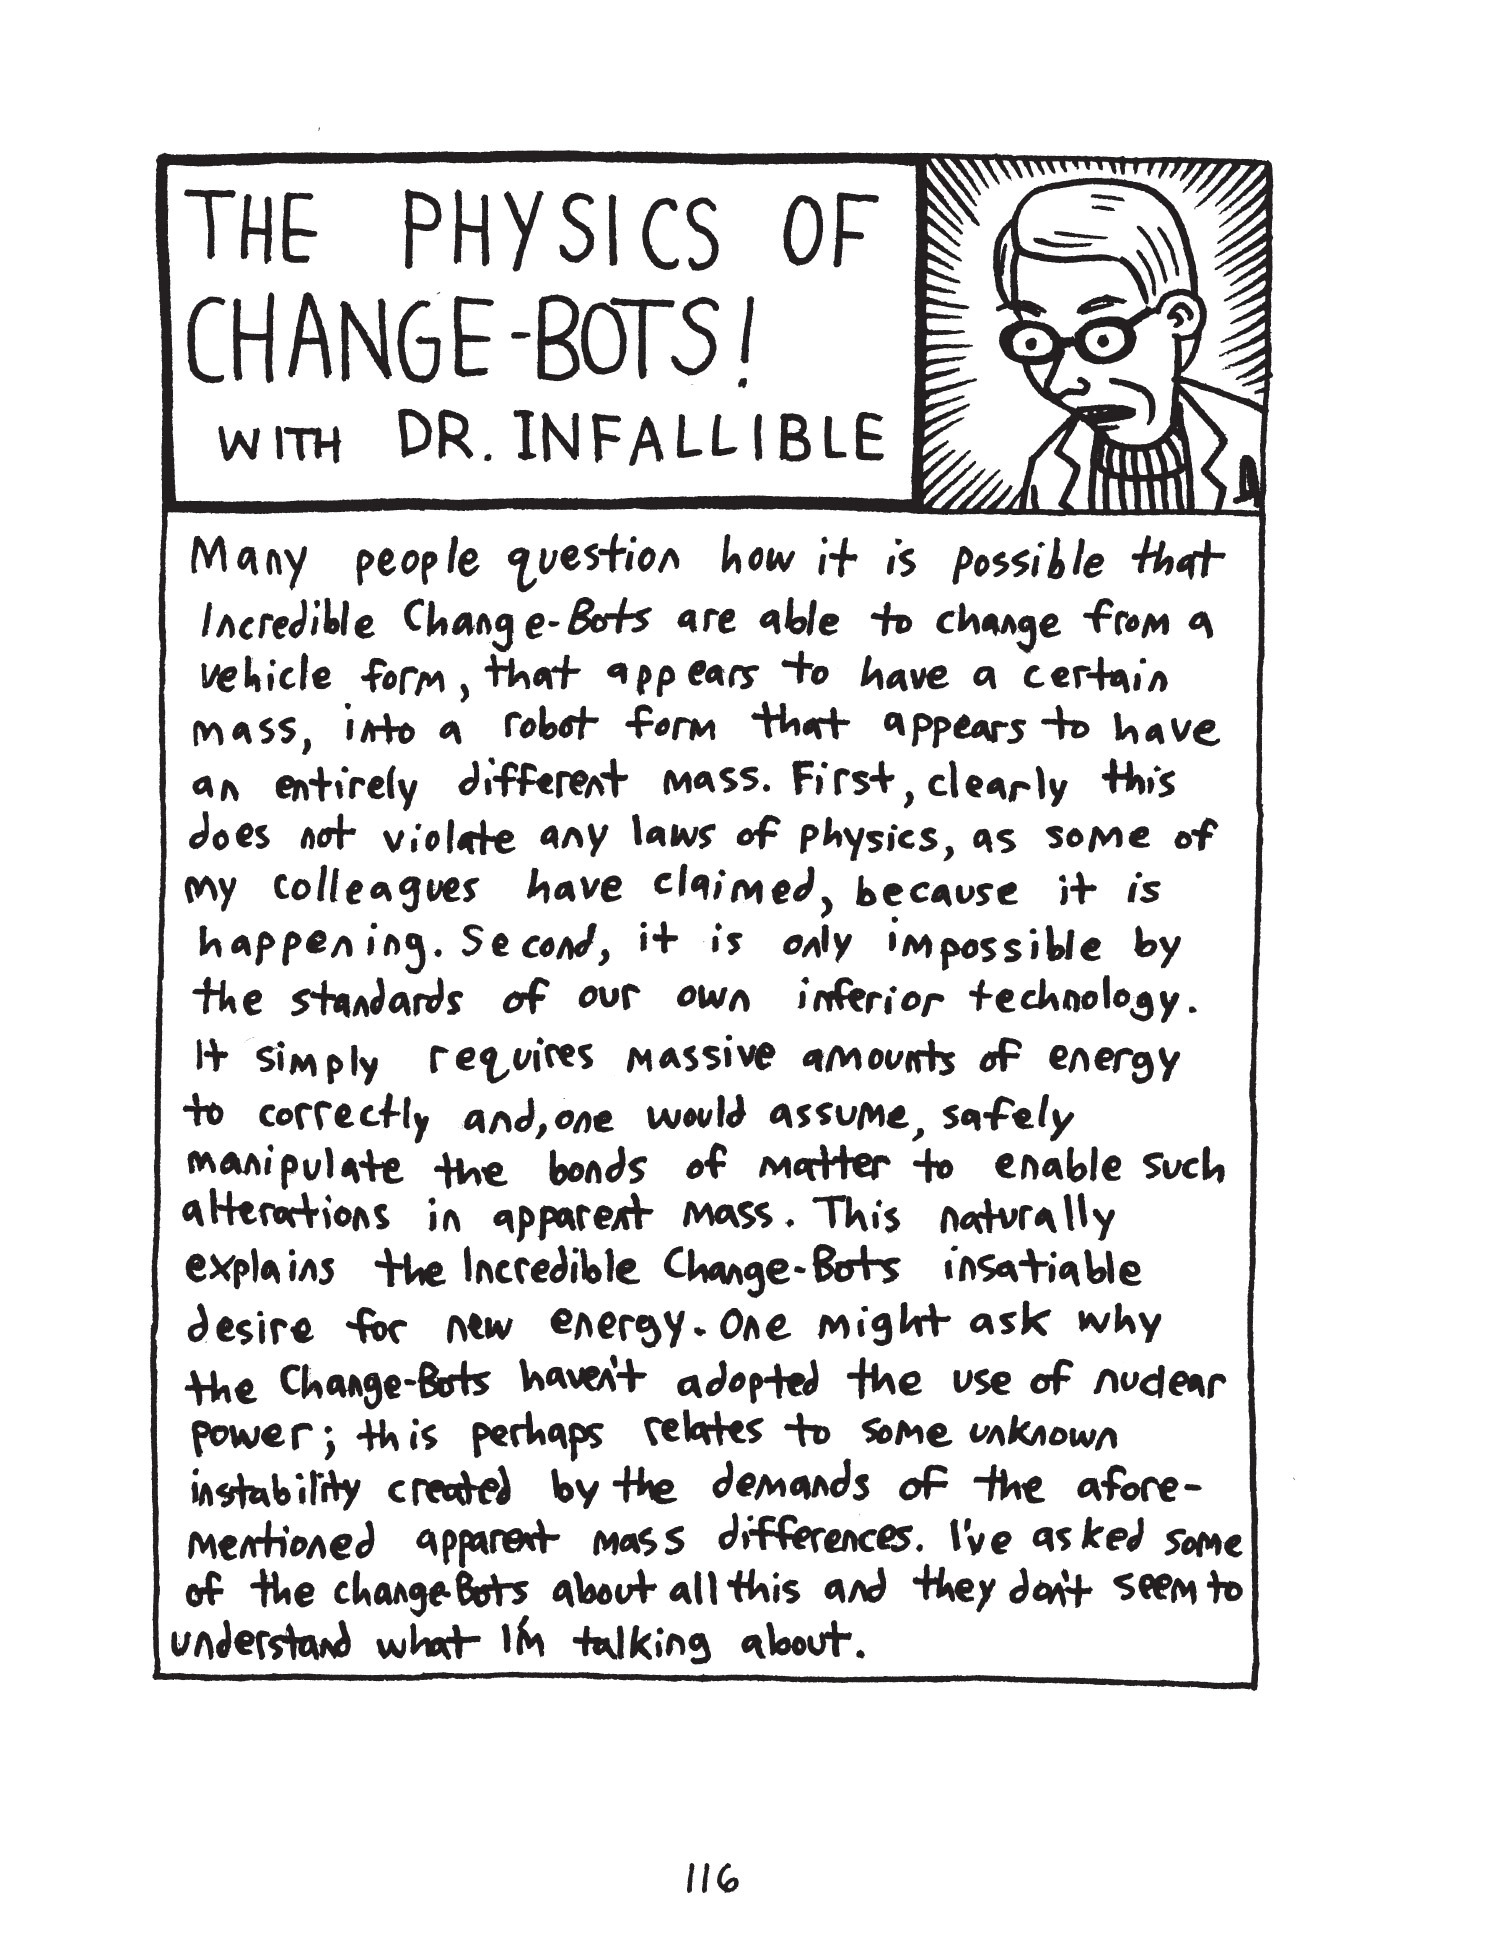 Read online Incredible Change-Bots: Two Point Something Something comic -  Issue # TPB (Part 2) - 15